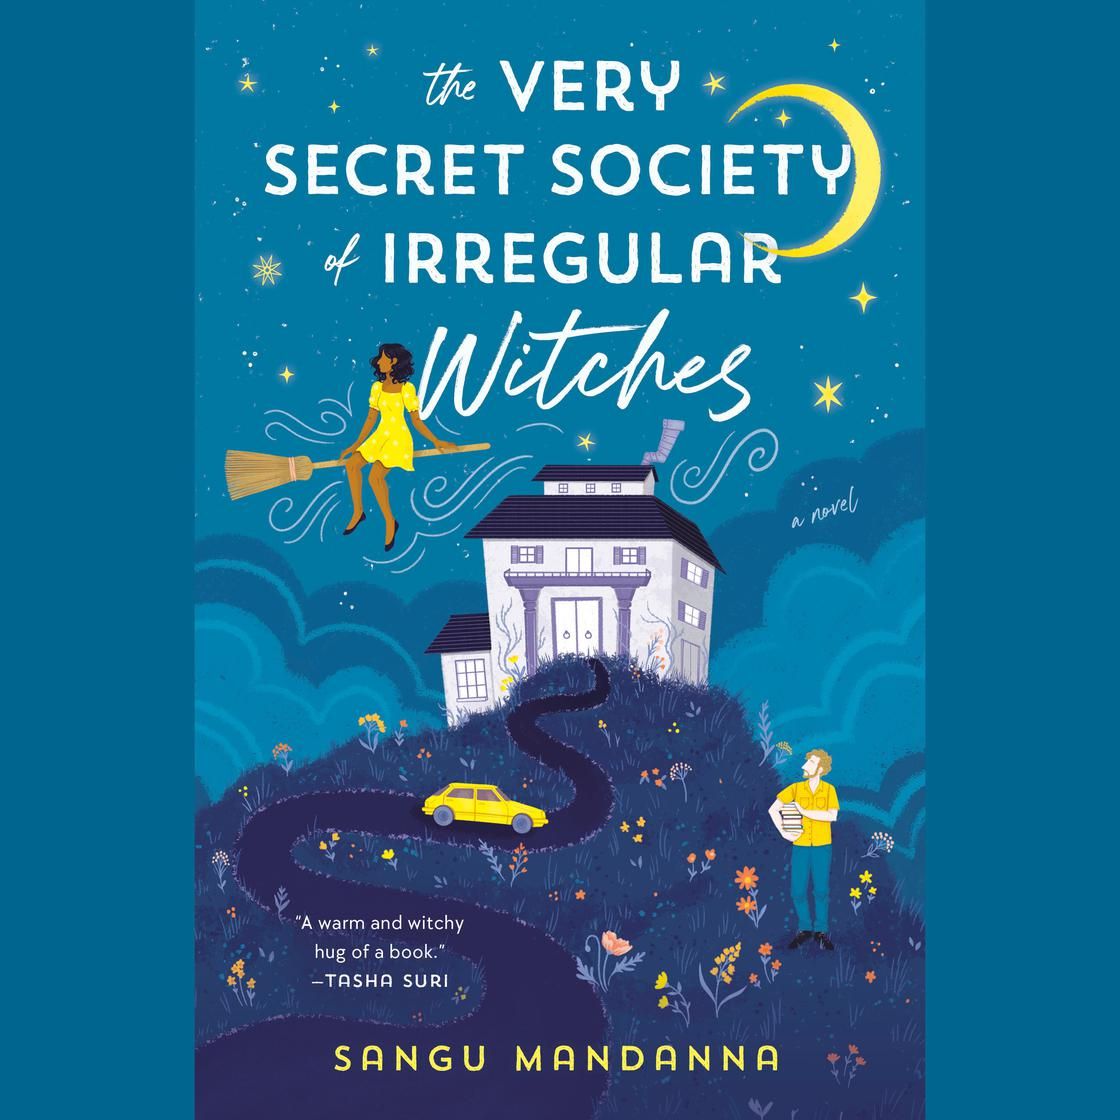 The Very Secret Society of Irregular Witches | Libro.fm (US)